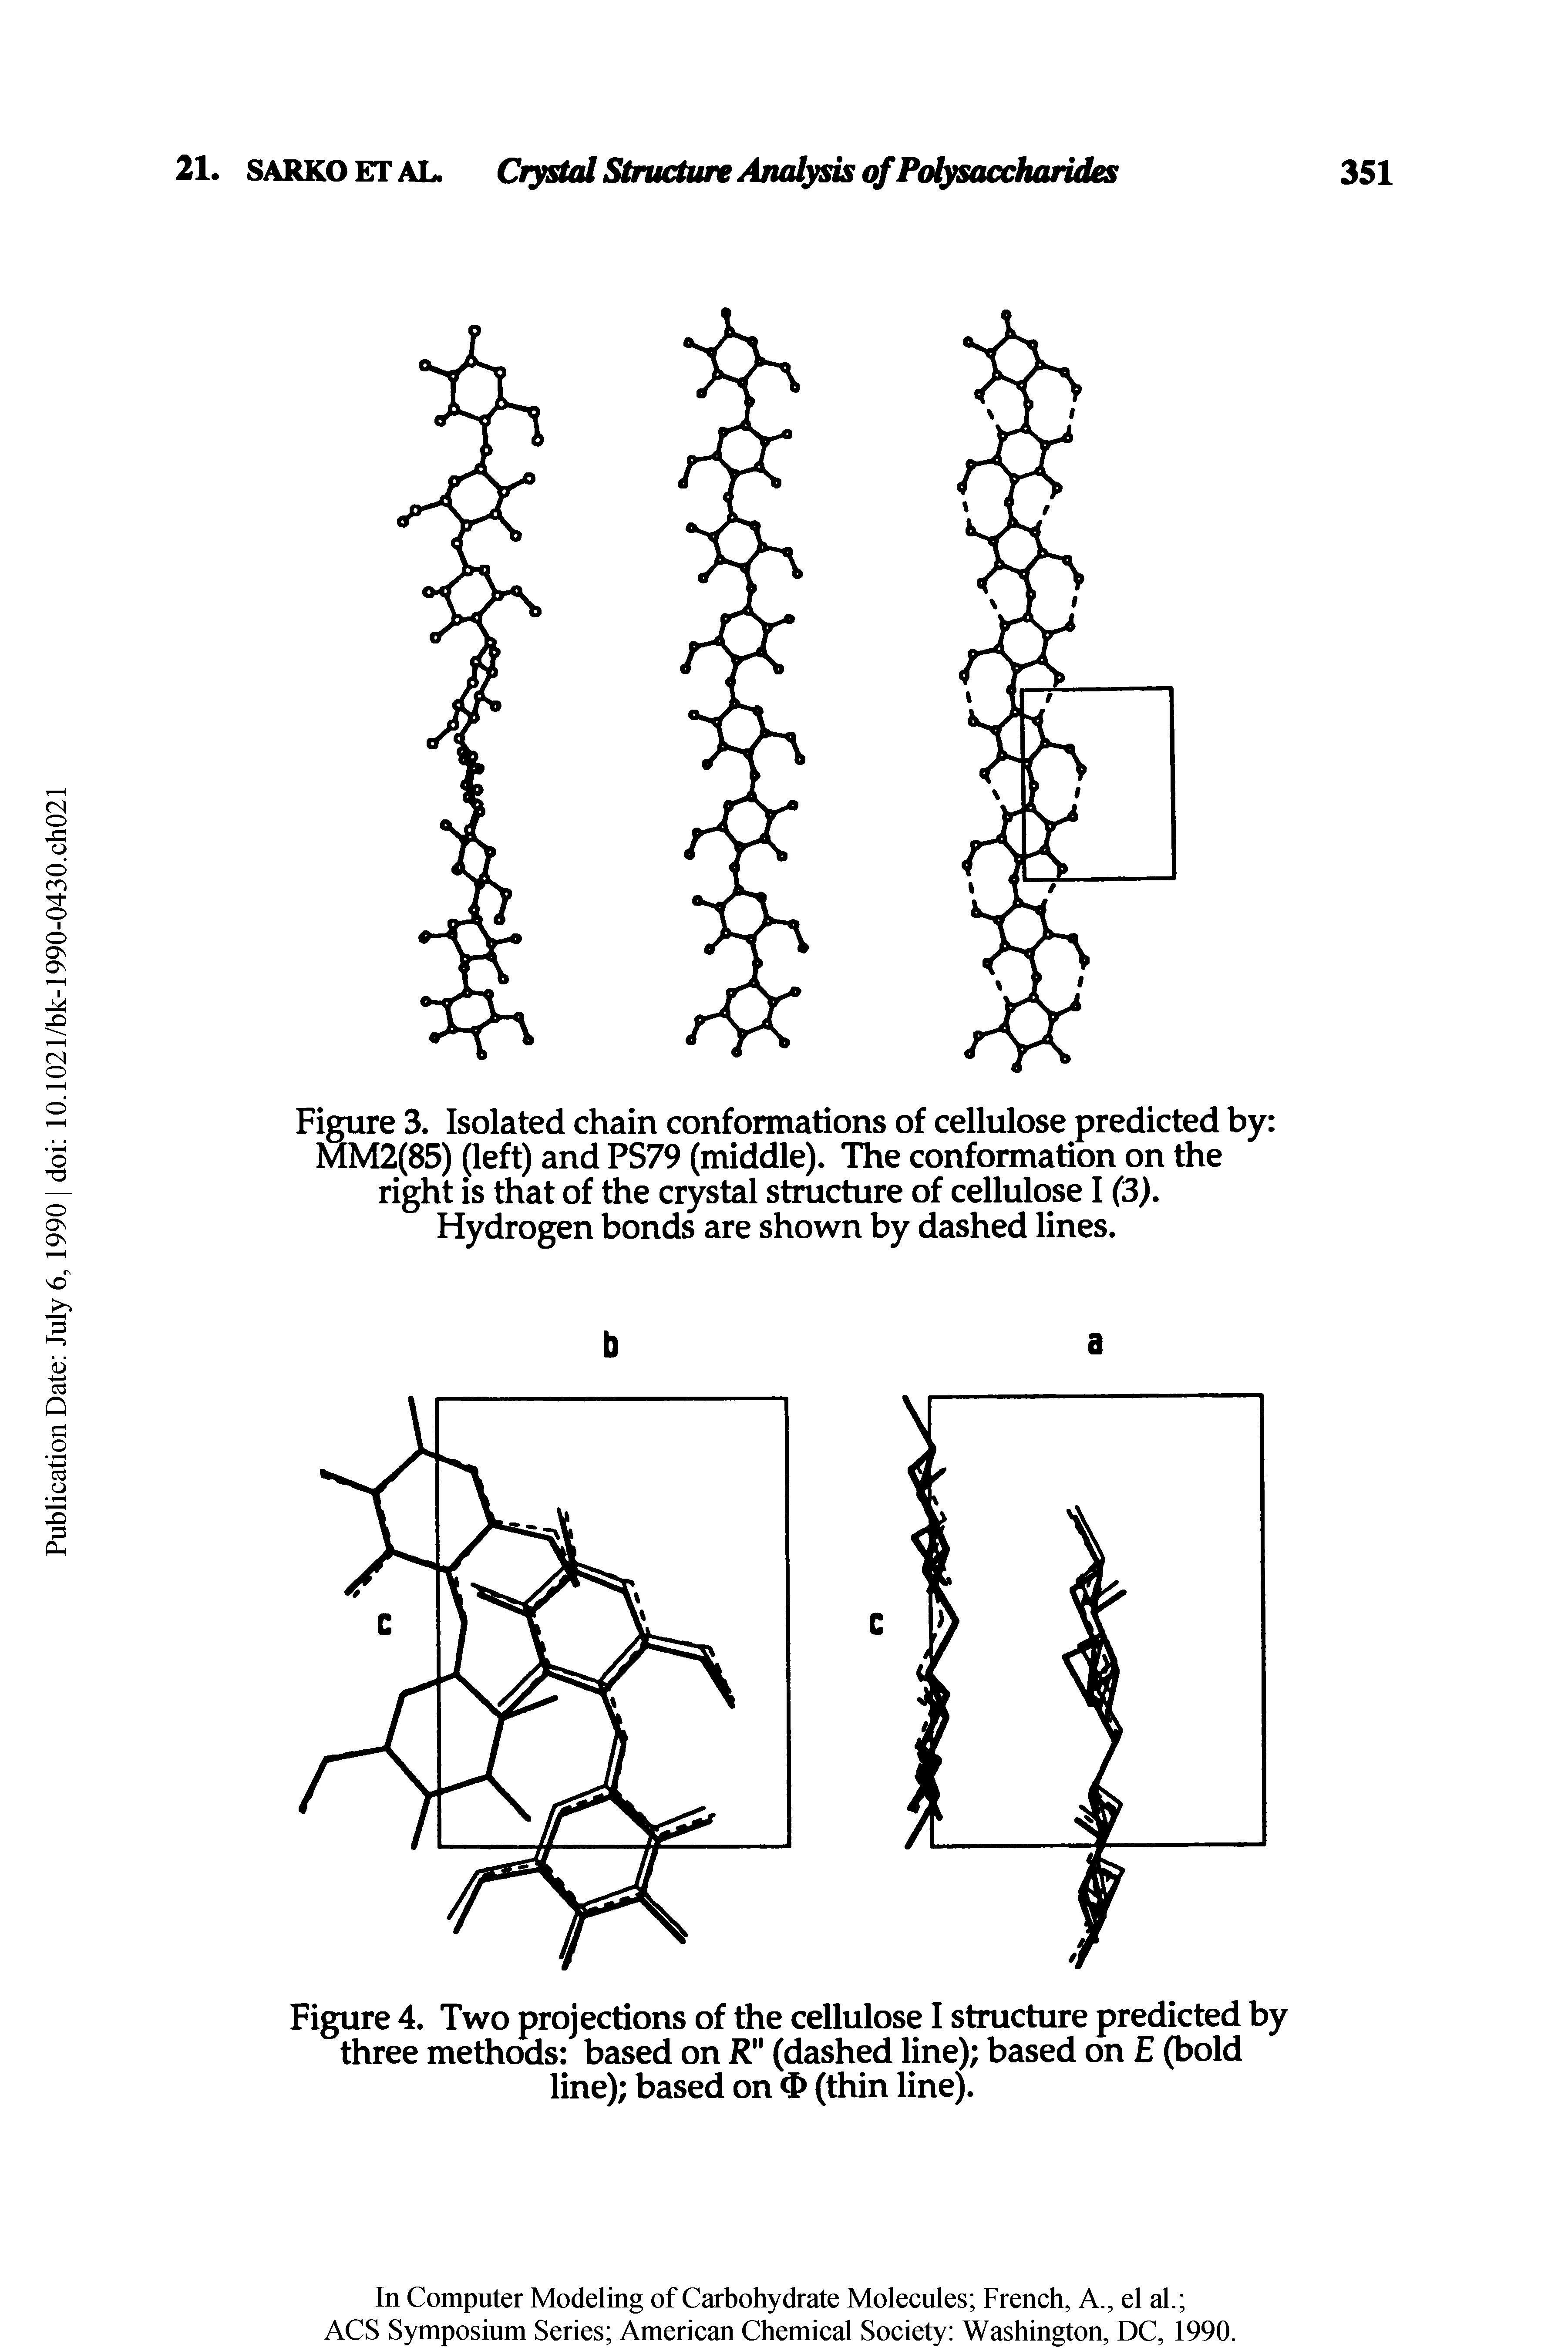 Figure 4. Two projections of the cellulose I structure predicted by three methods based on R (dashed line) based on E (bold line) based on (thin line).